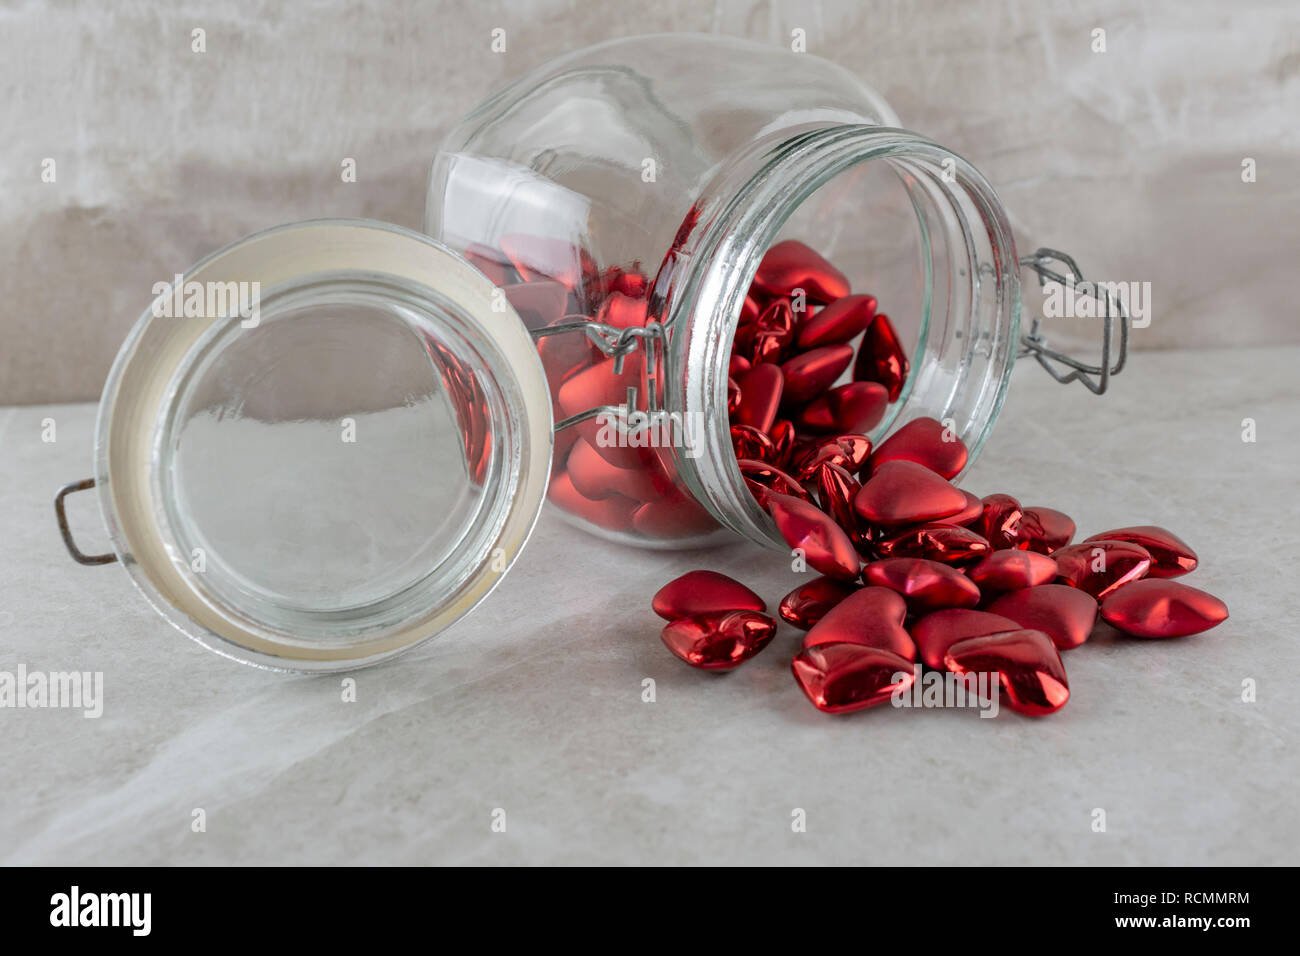 Jar of Red Hearts on side.  Side view.  Tan background. Stock Photo